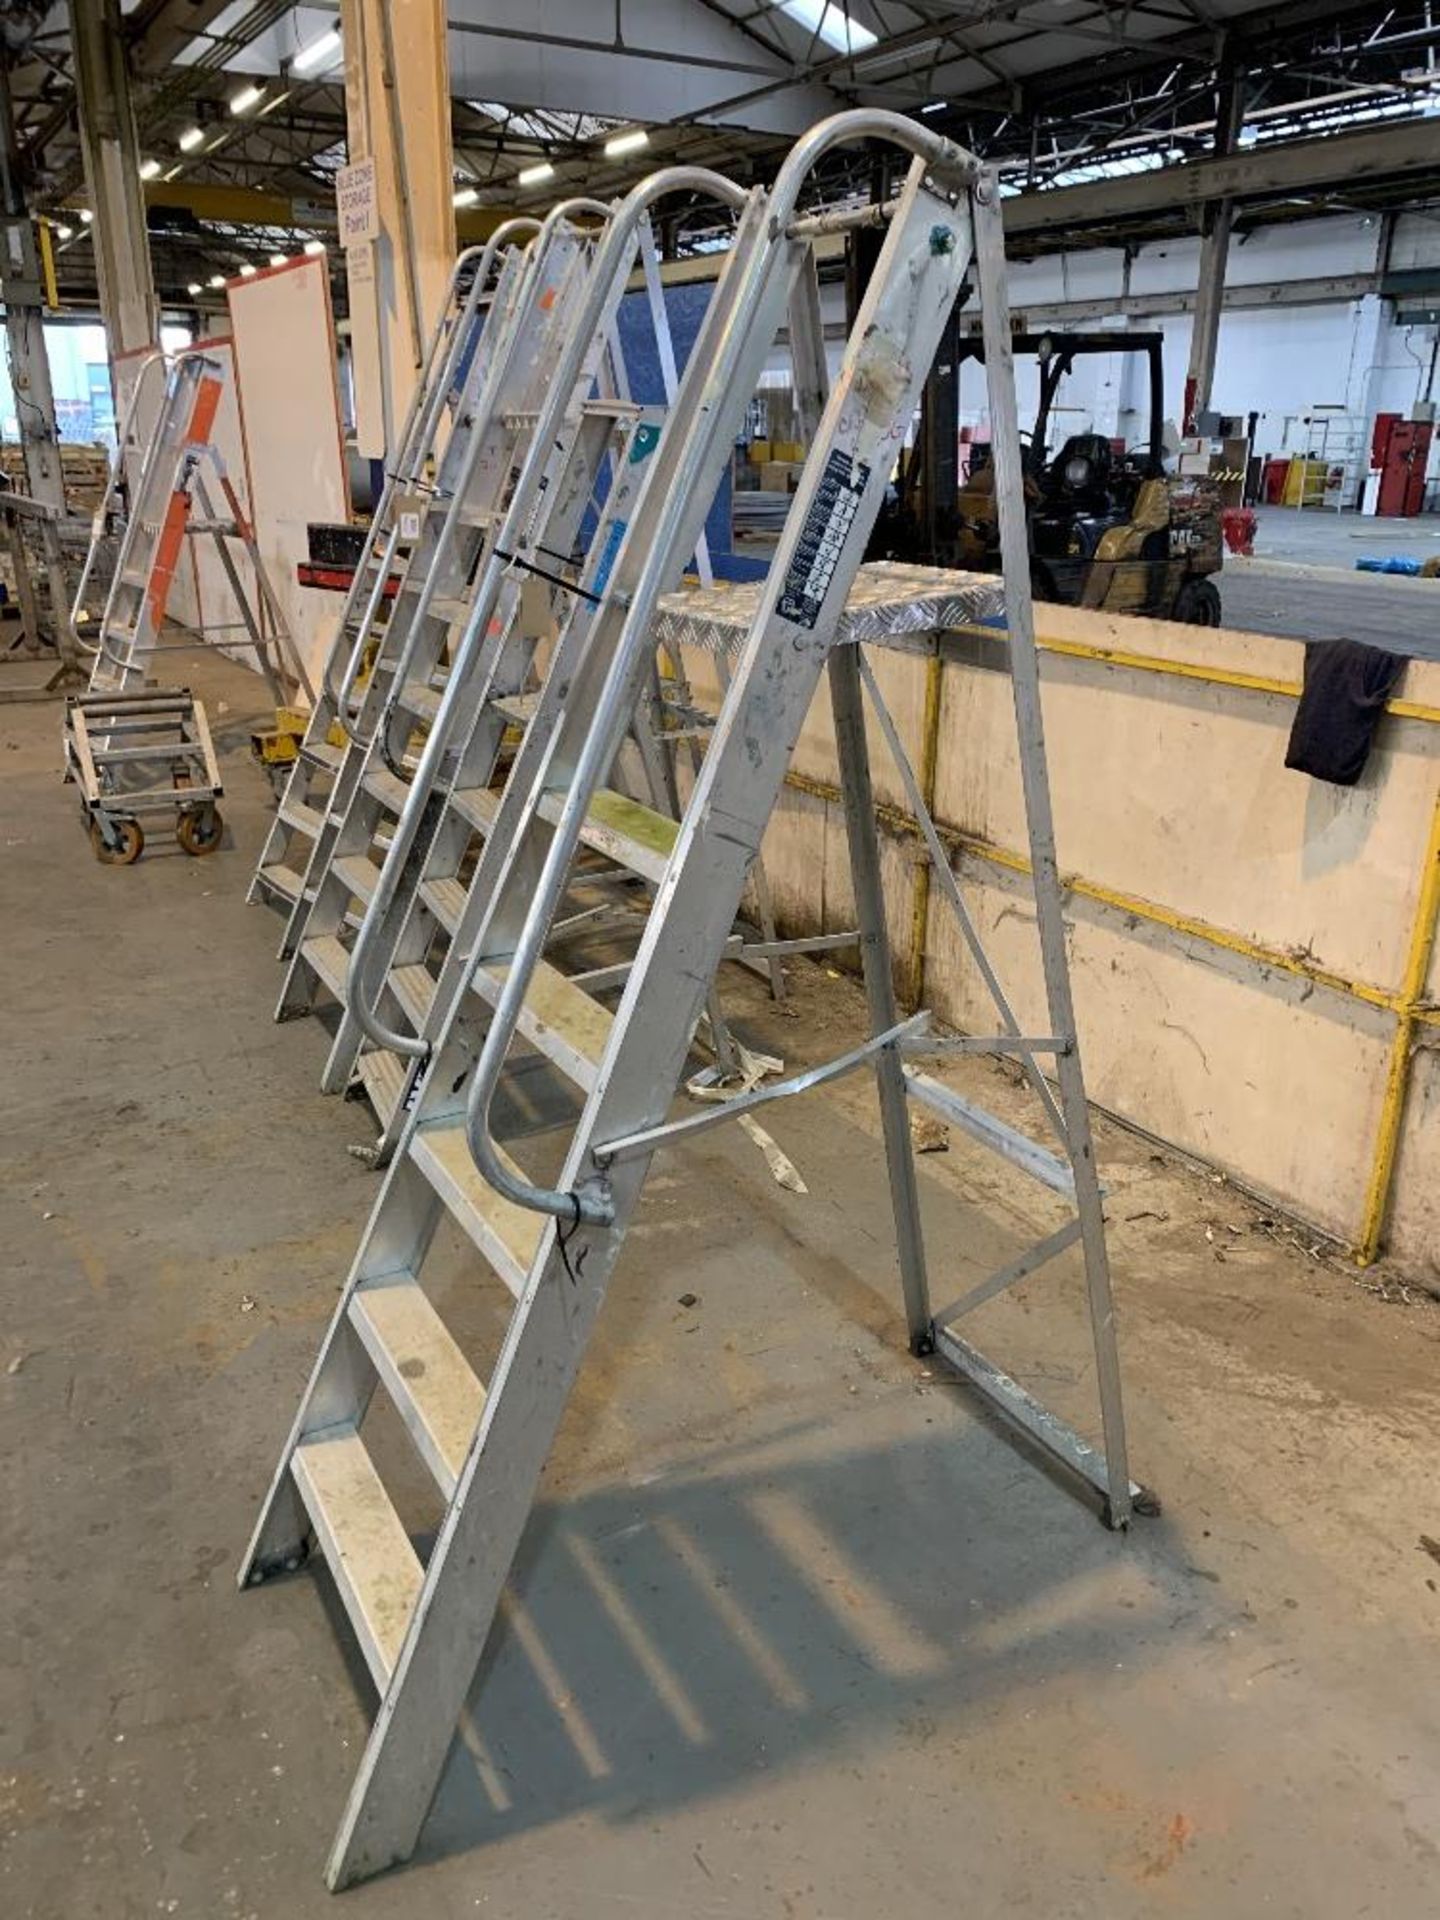 6 Rung Ramsey Ladders Step Ladder - Image 2 of 2